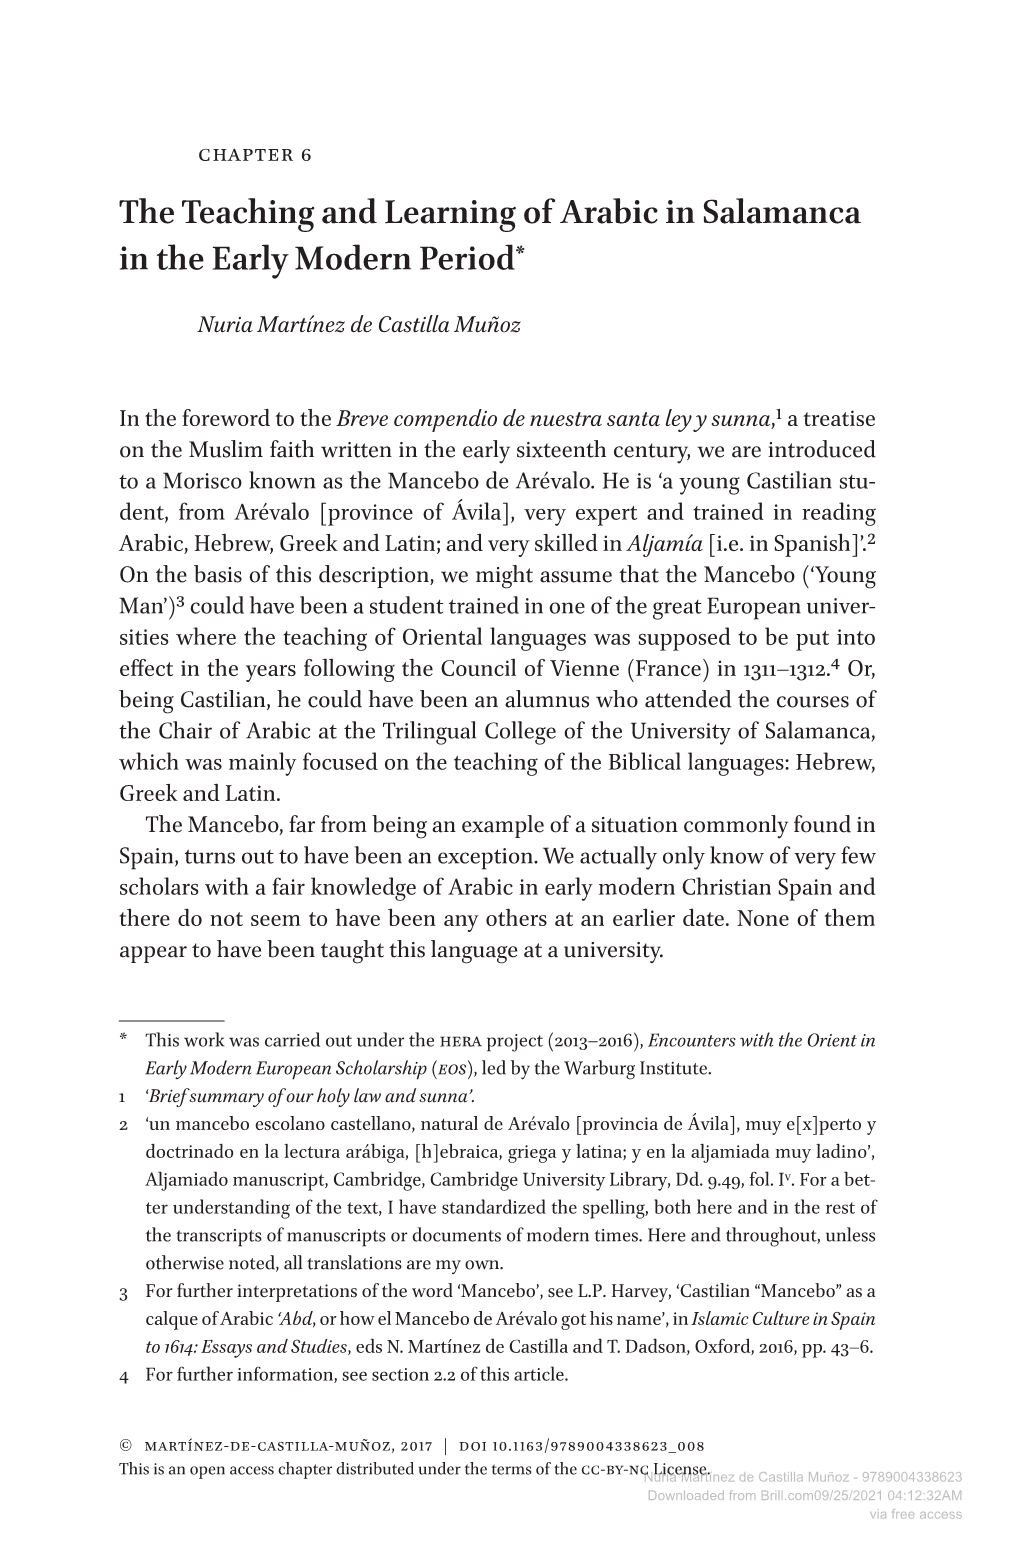 The Teaching and Learning of Arabic in Salamanca in the Early Modern Period*